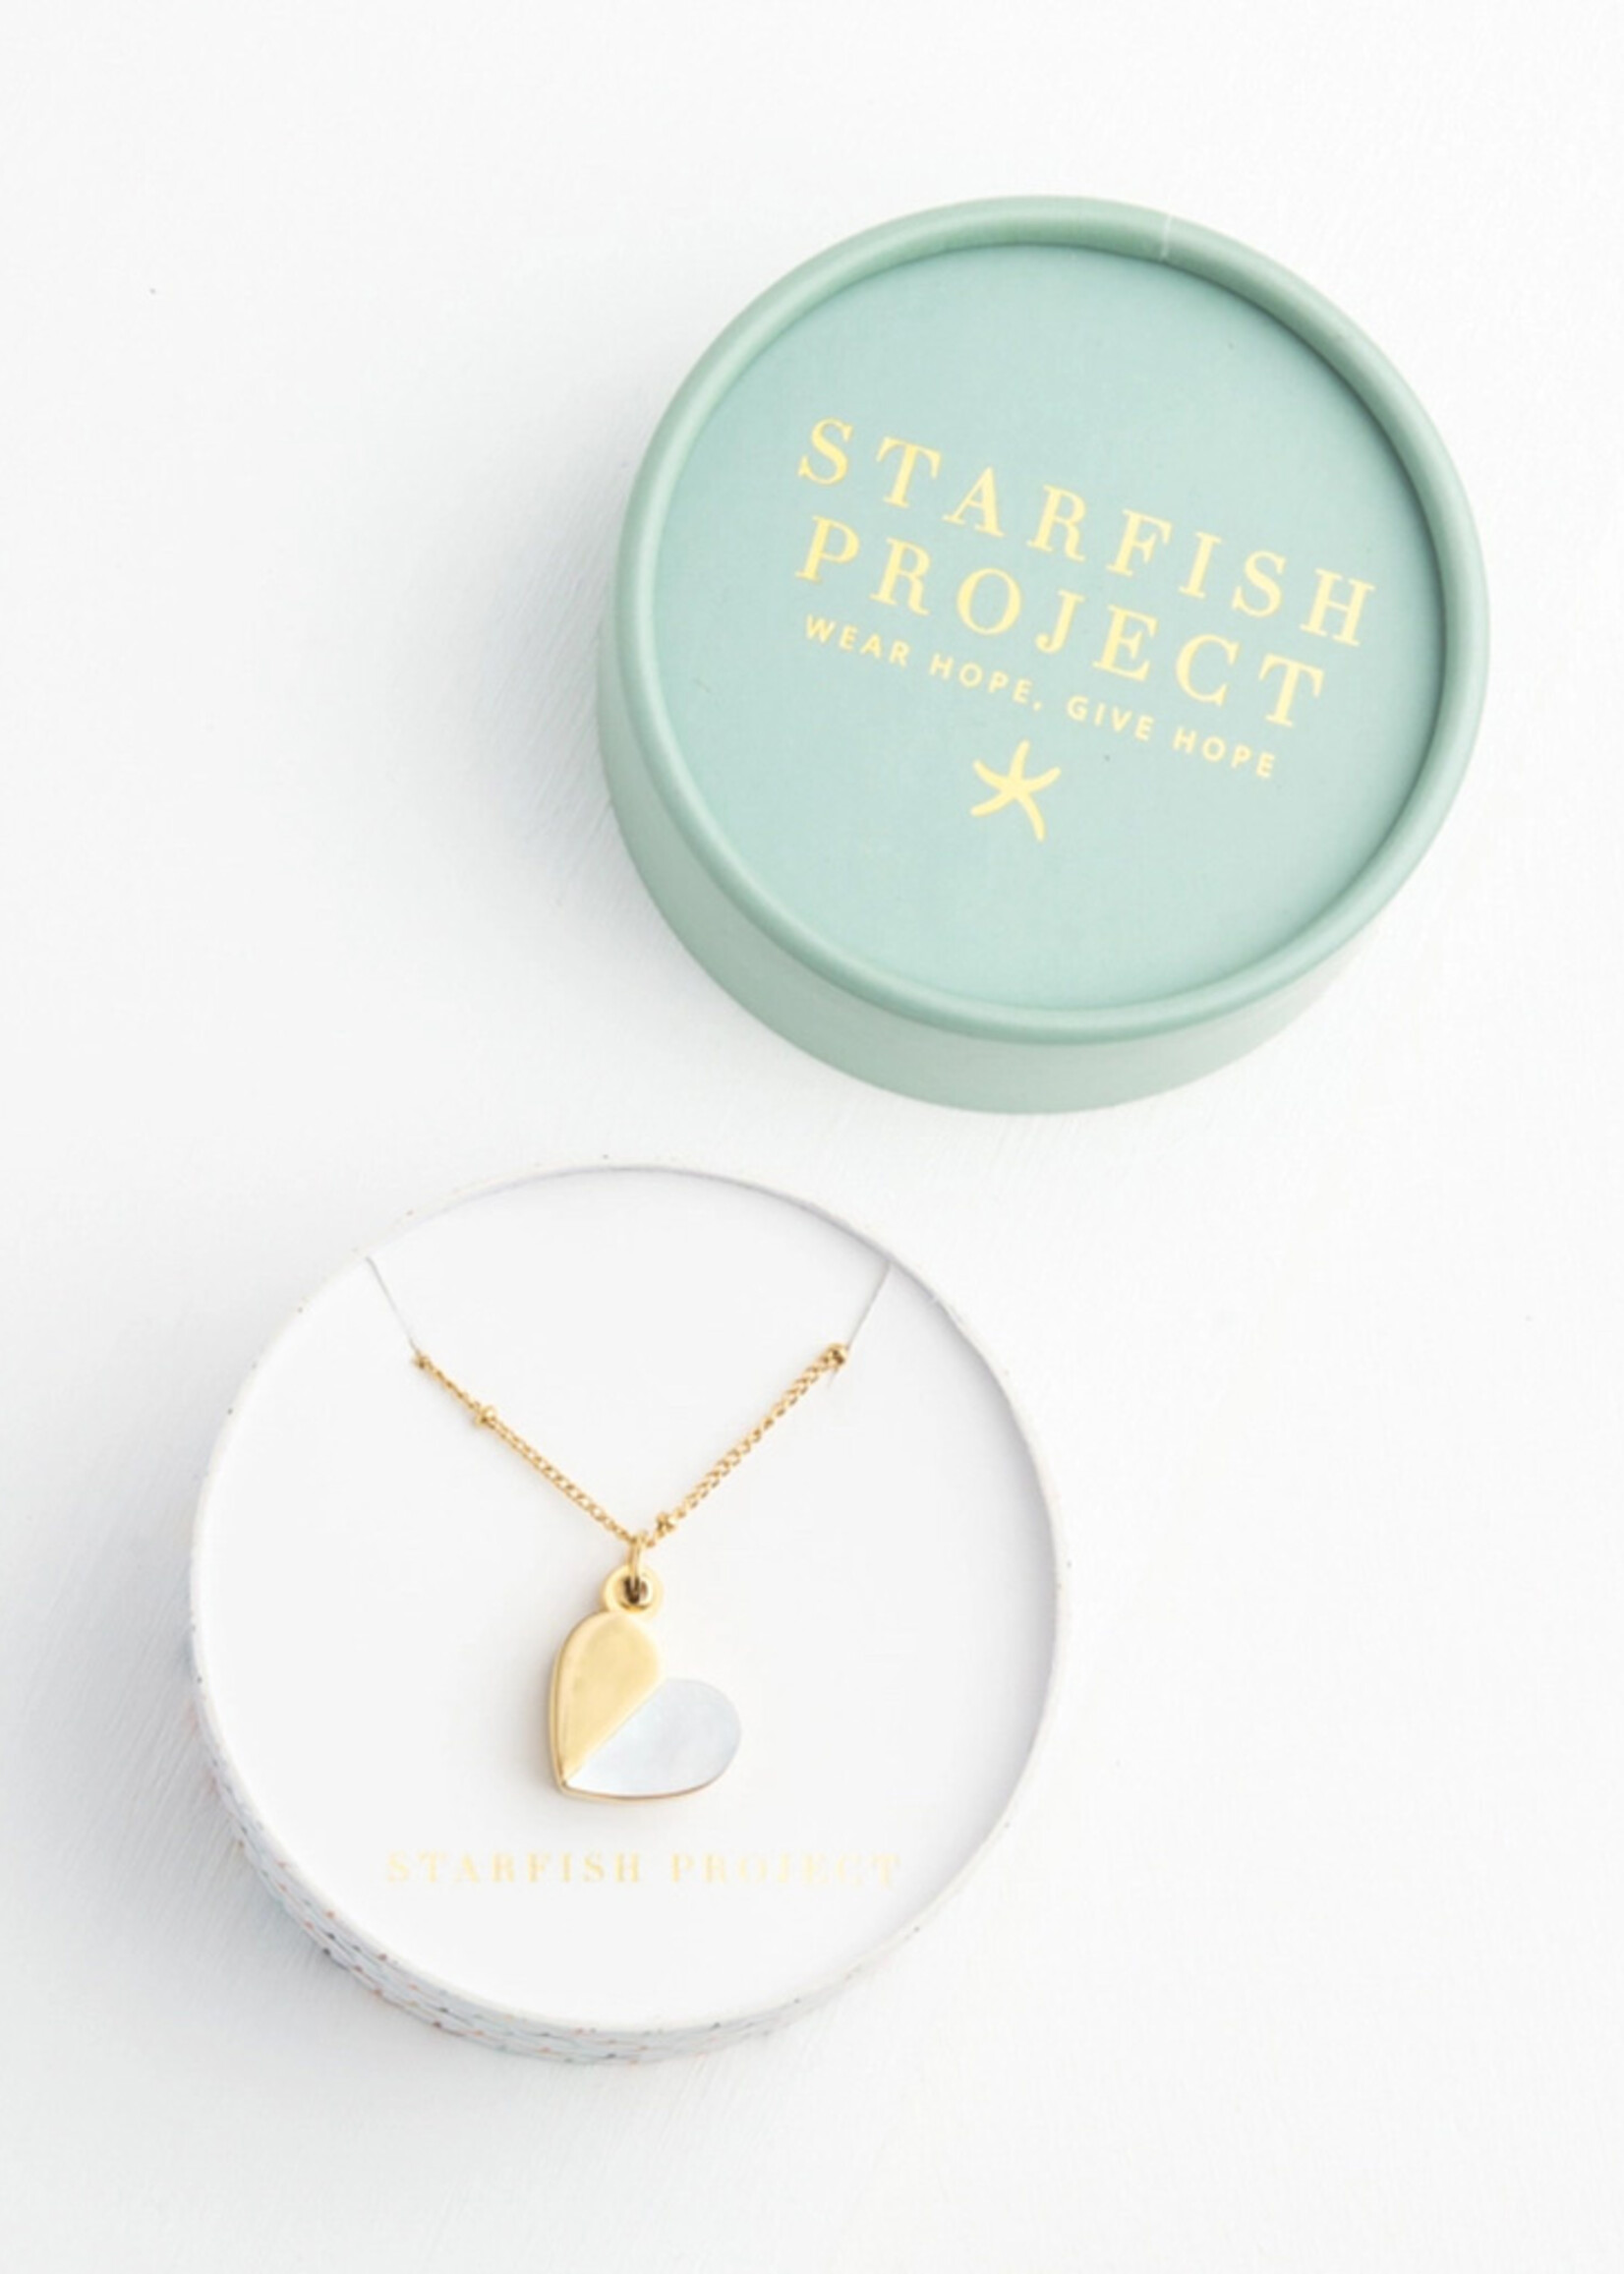 Starfish Project Give Hope Heart Locket Necklace